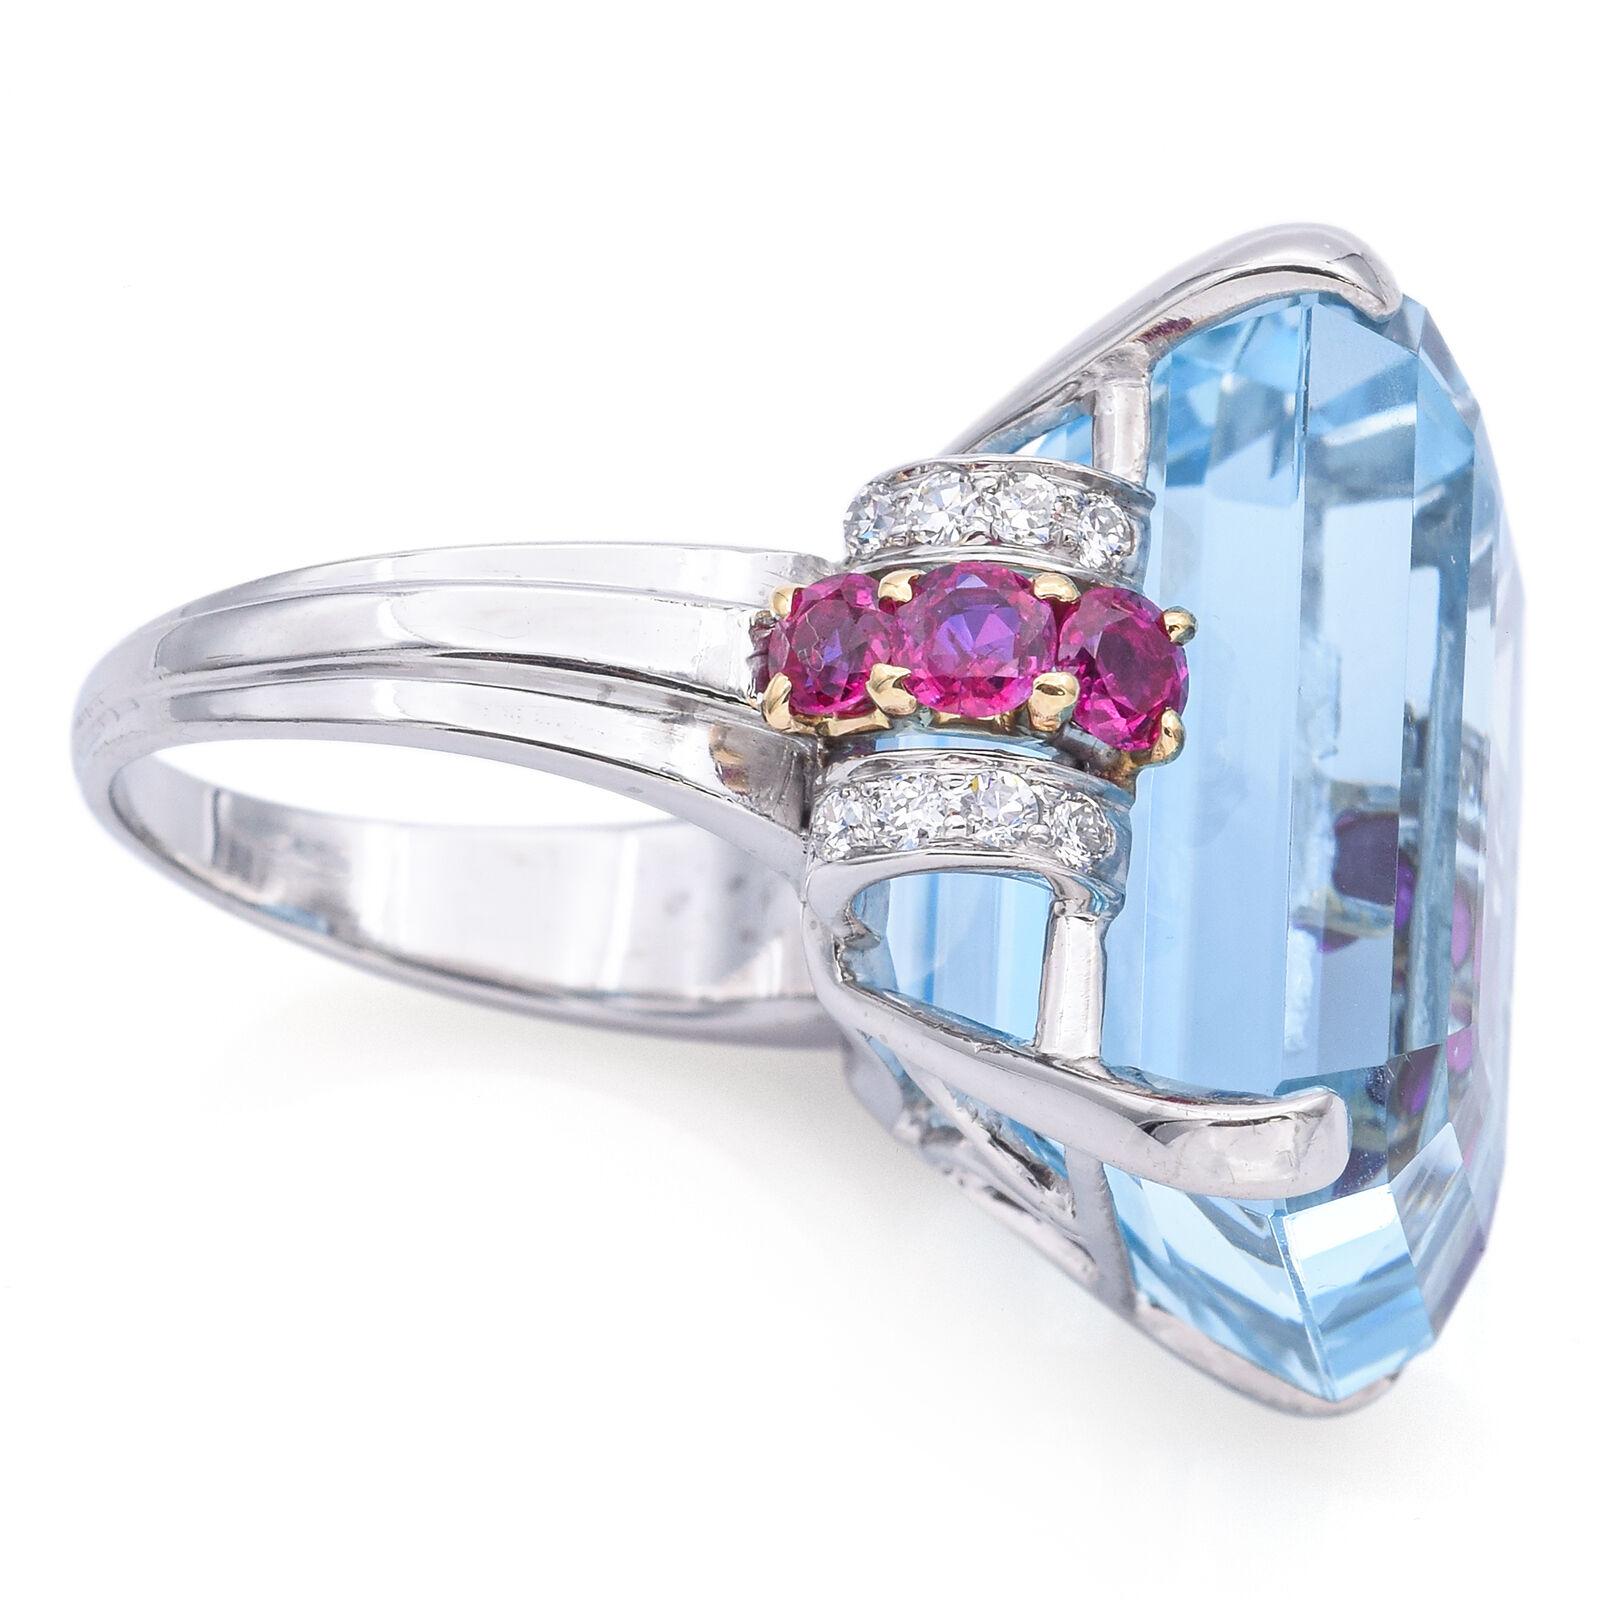 Appraised 30 TCW Aquamarine, Ruby & 0.40 TCW Diamond Platinum Ring +Box In Good Condition For Sale In New York, NY